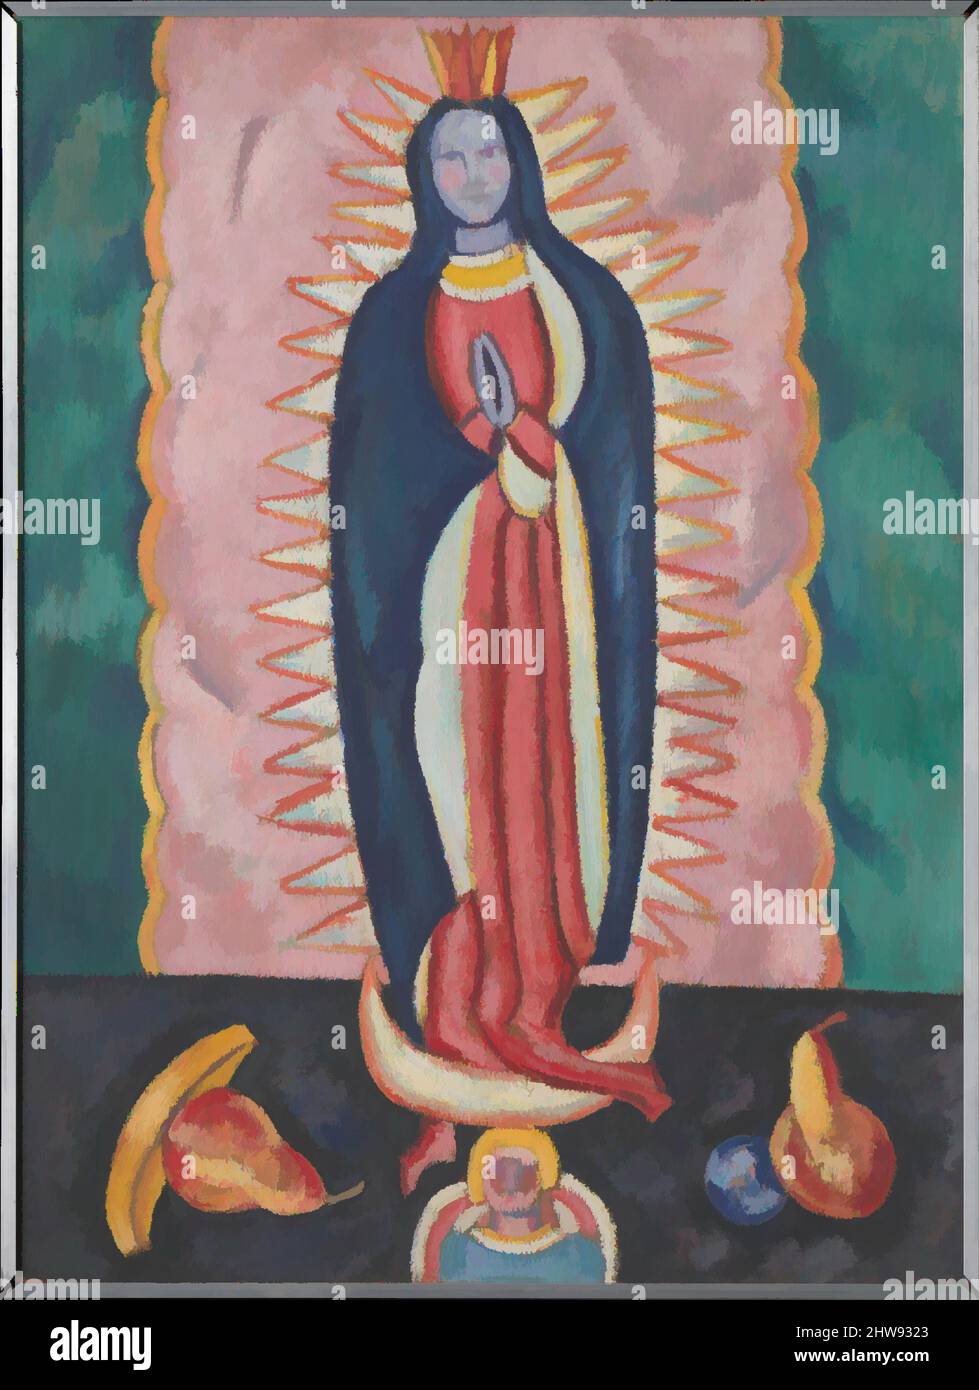 Art inspired by The Virgin of Guadalupe, ca. 1918–19, Oil and charcoal on paperboard, 31 7/8 x 23 7/8 in. (81 x 60.6 cm), Paintings, Marsden Hartley (American, Lewiston, Maine 1877–1943 Ellsworth, Maine), Not long after his return to the United States from Germany, Hartley ventured to, Classic works modernized by Artotop with a splash of modernity. Shapes, color and value, eye-catching visual impact on art. Emotions through freedom of artworks in a contemporary way. A timeless message pursuing a wildly creative new direction. Artists turning to the digital medium and creating the Artotop NFT Stock Photo